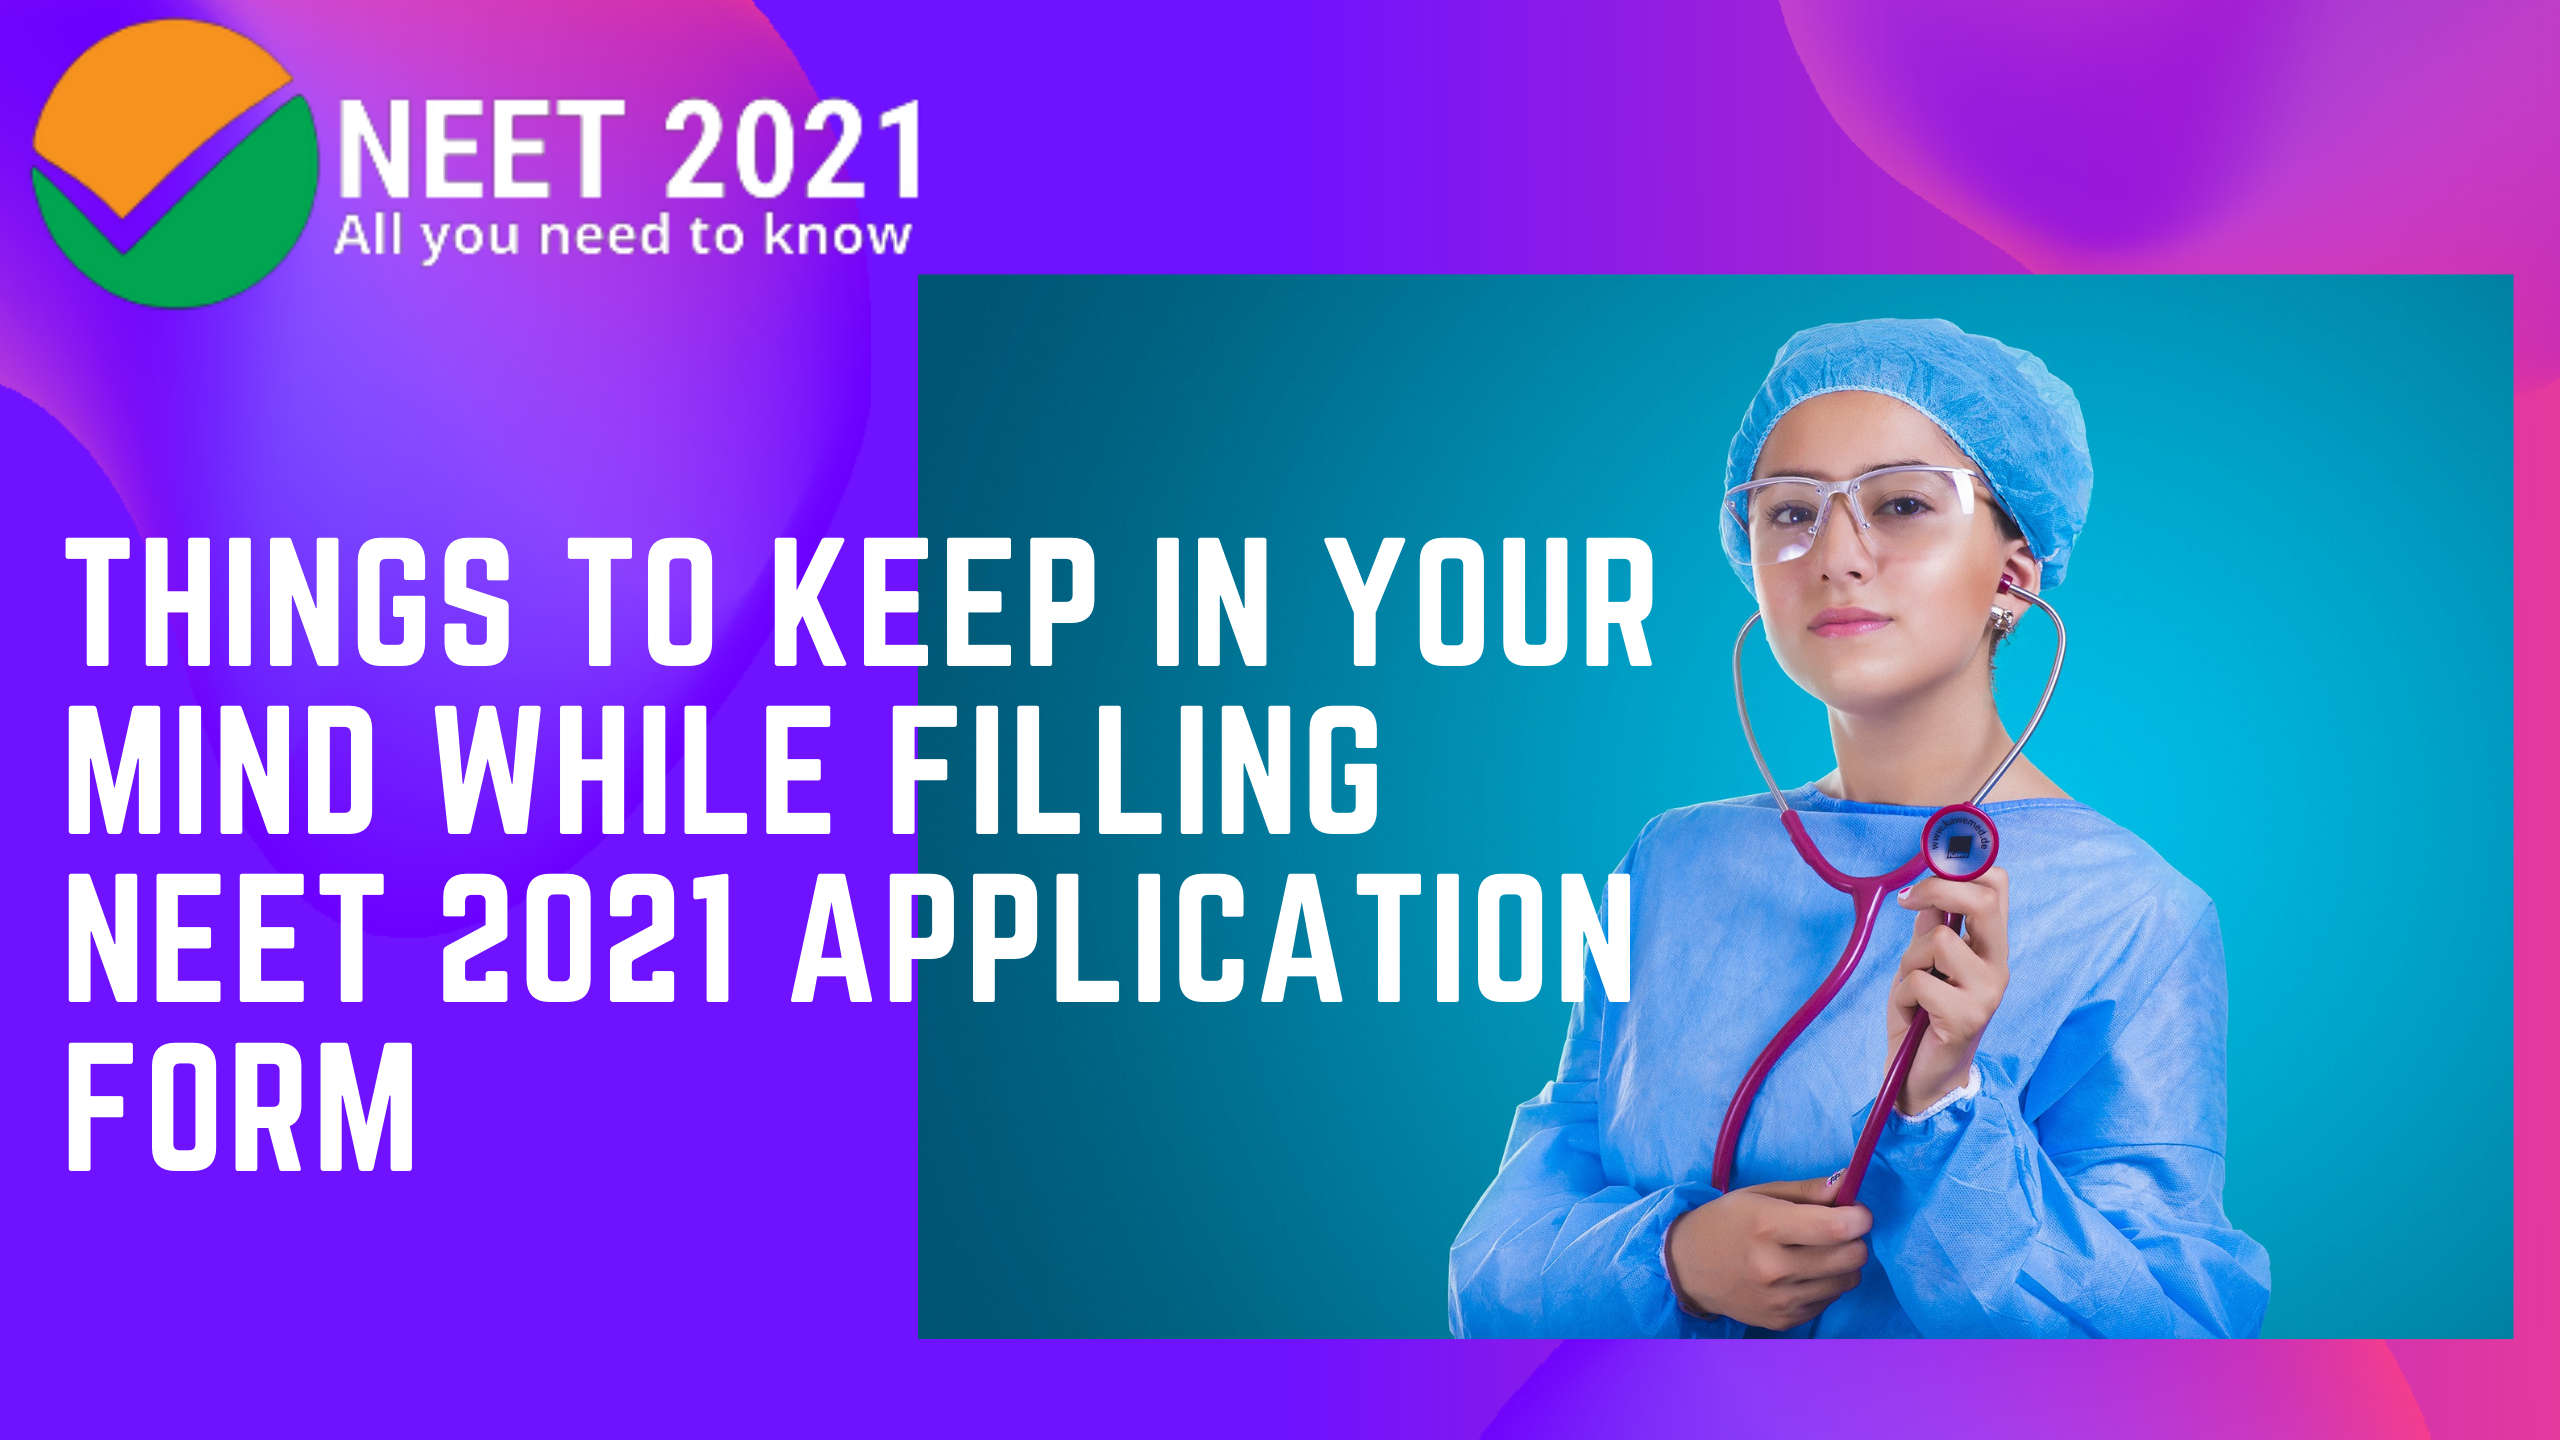 Things to Keep in Your Mind While Filling NEET 2021 Application Form